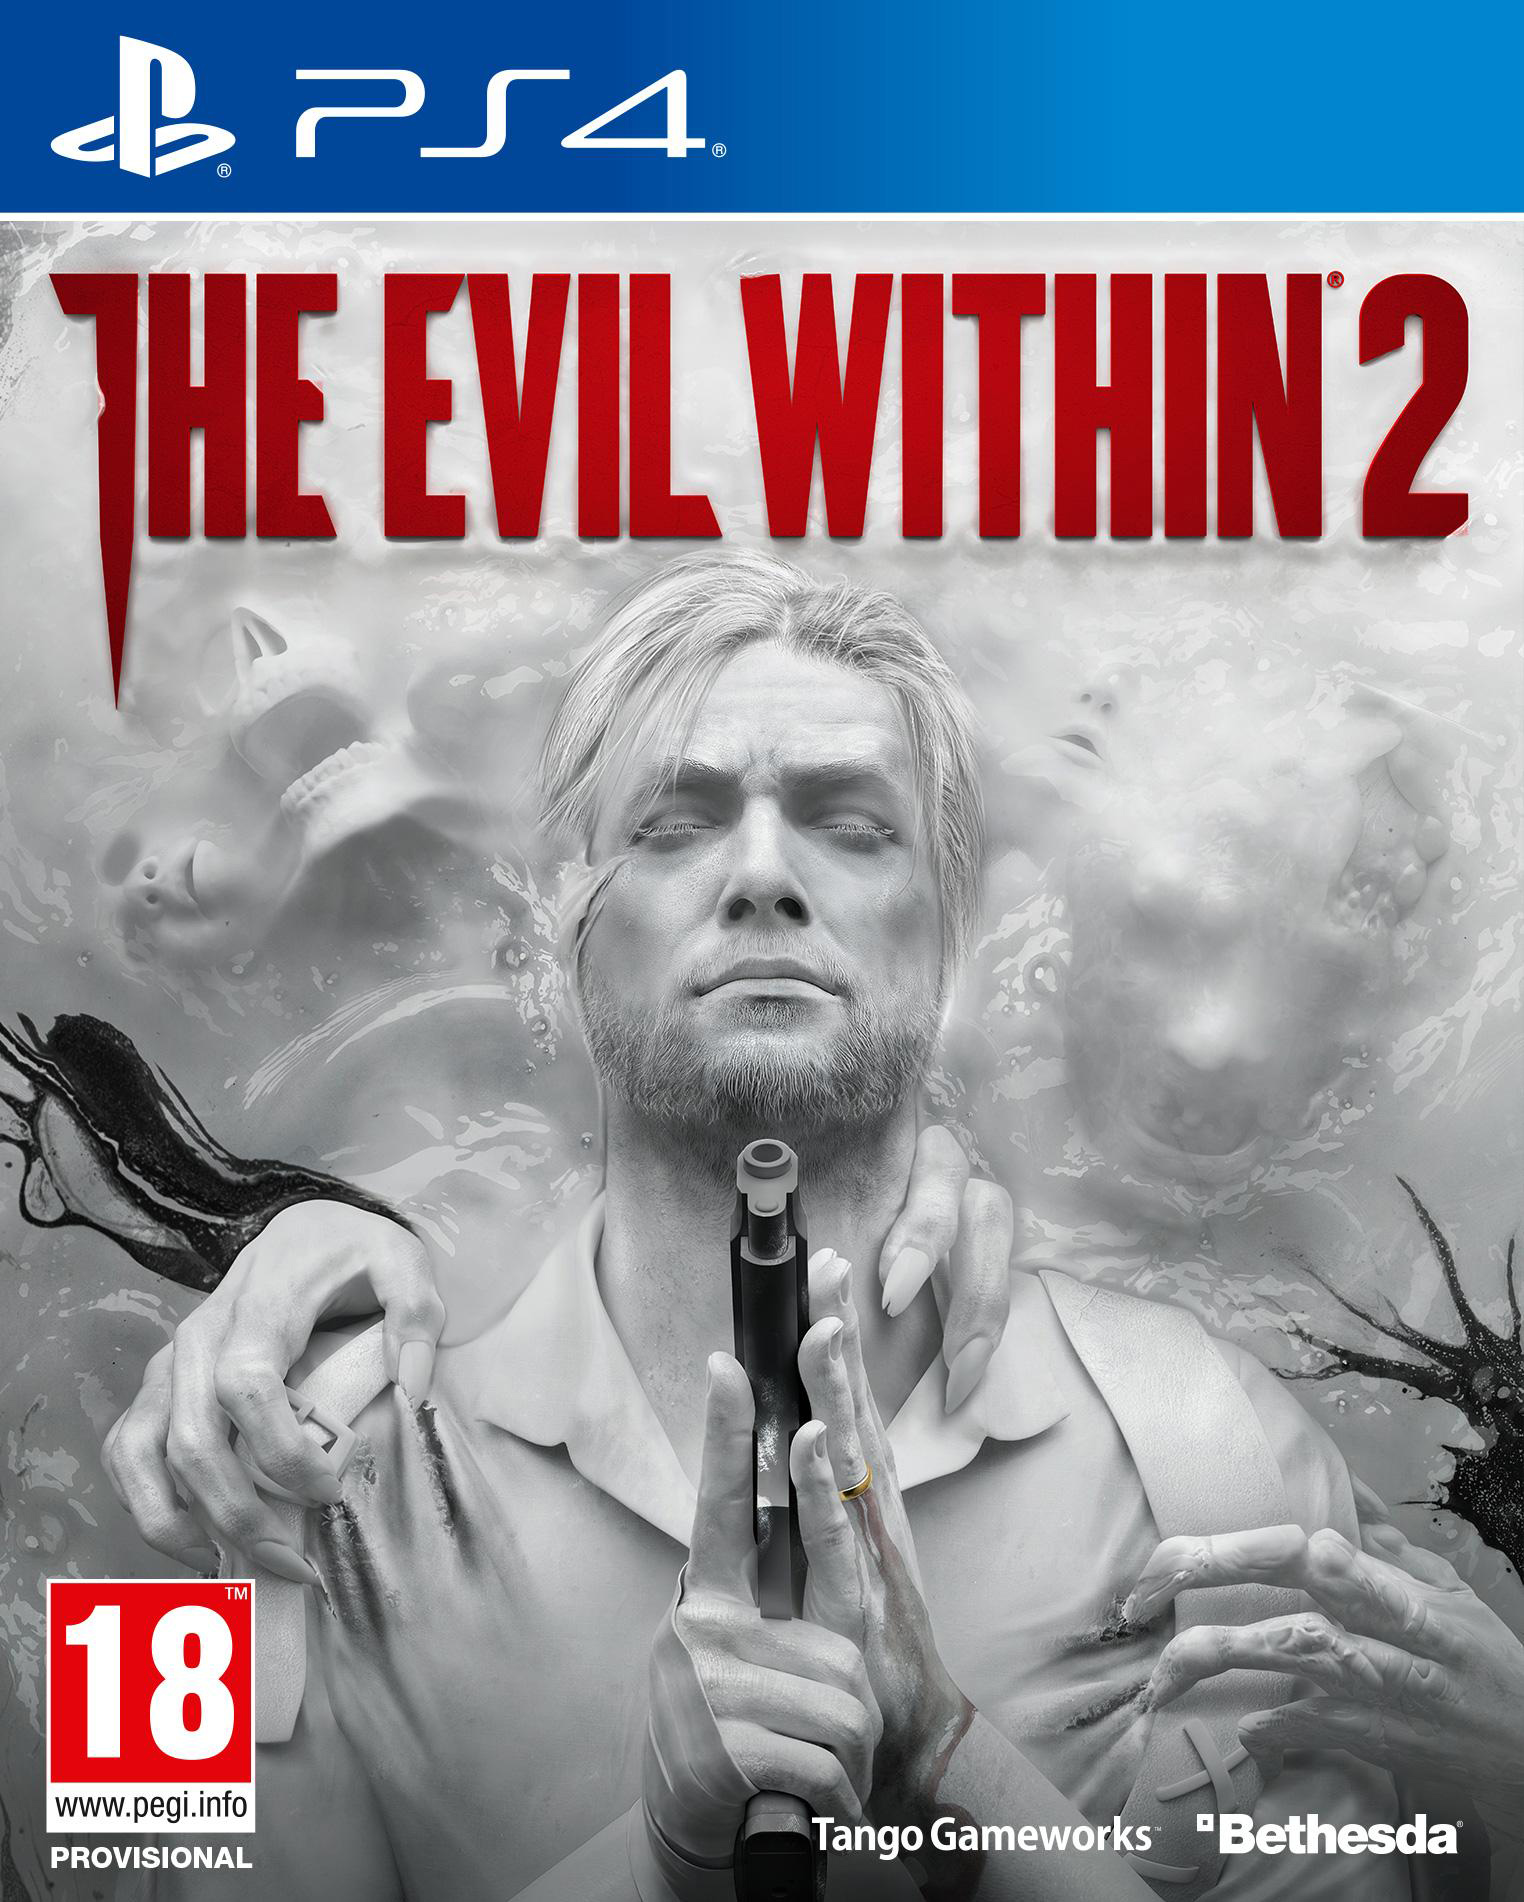 The Evil Within 2 [PS4] 5.05 / 6.72 / 7.02 [EUR] (2017) [Русский] (v1.04)